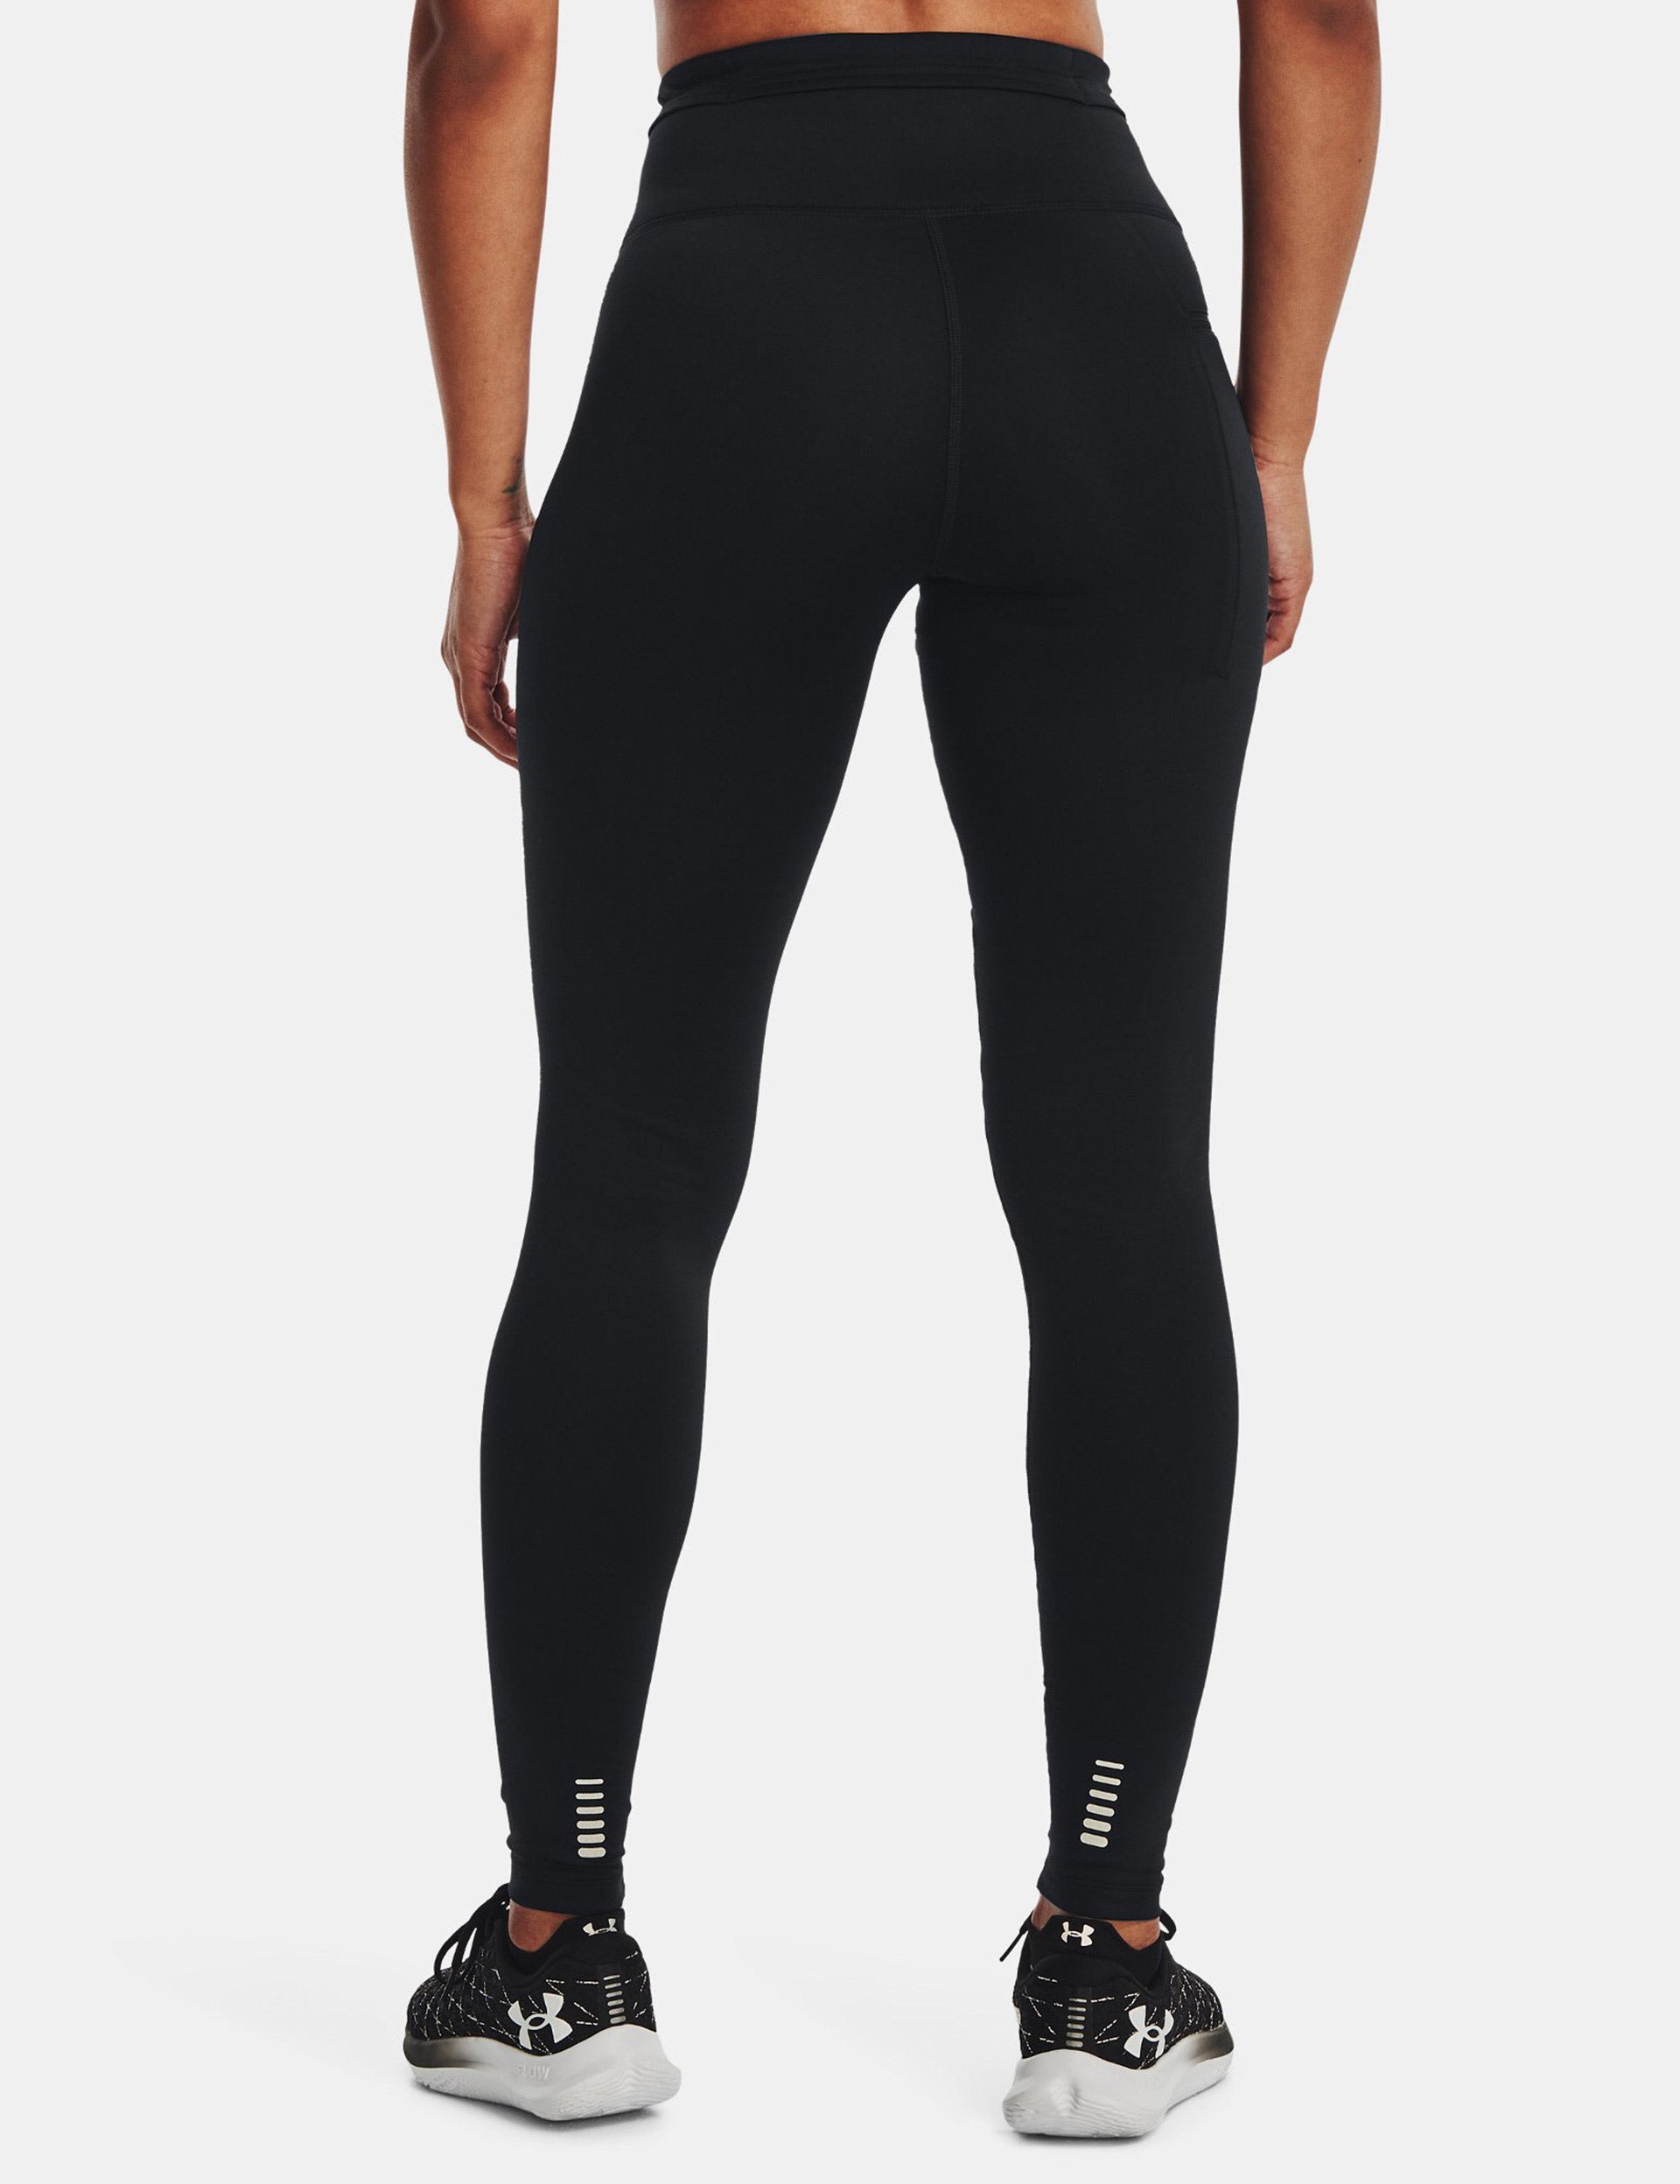 Under Armour OutRun The Cold Tights - Black/Reflectiveimage2- The Sports Edit